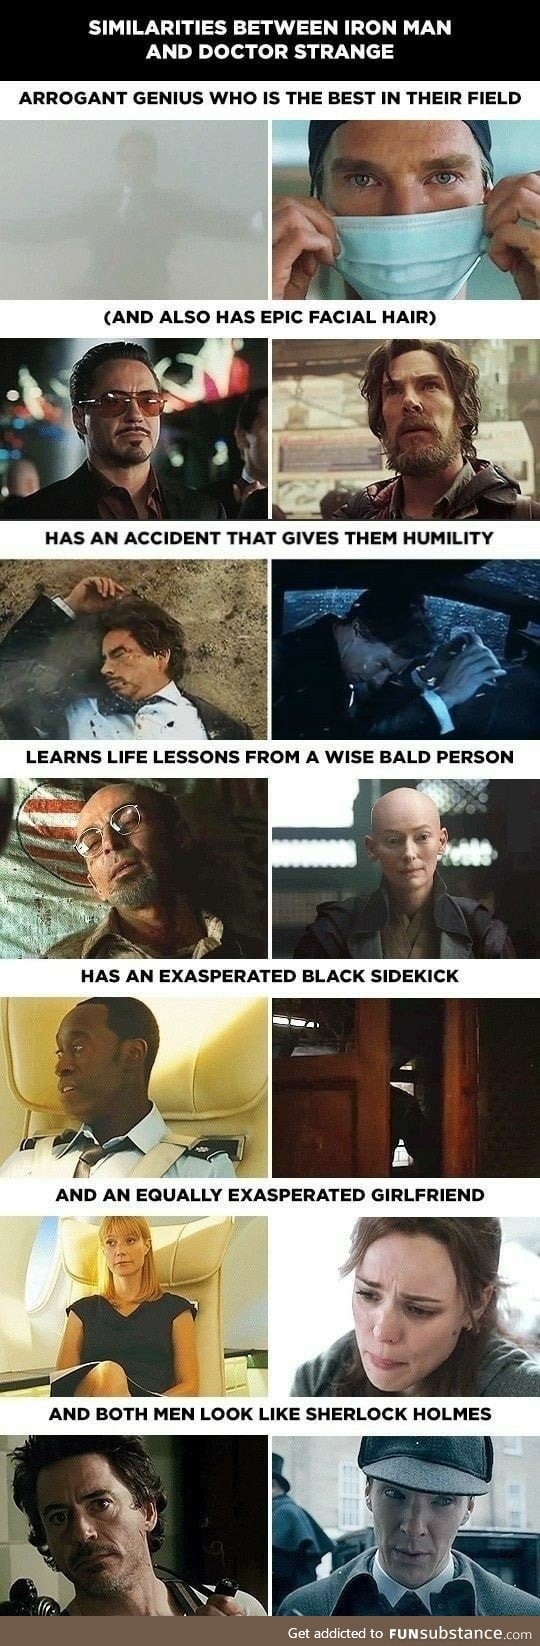 The similarities in Iron Man and Dr Strange